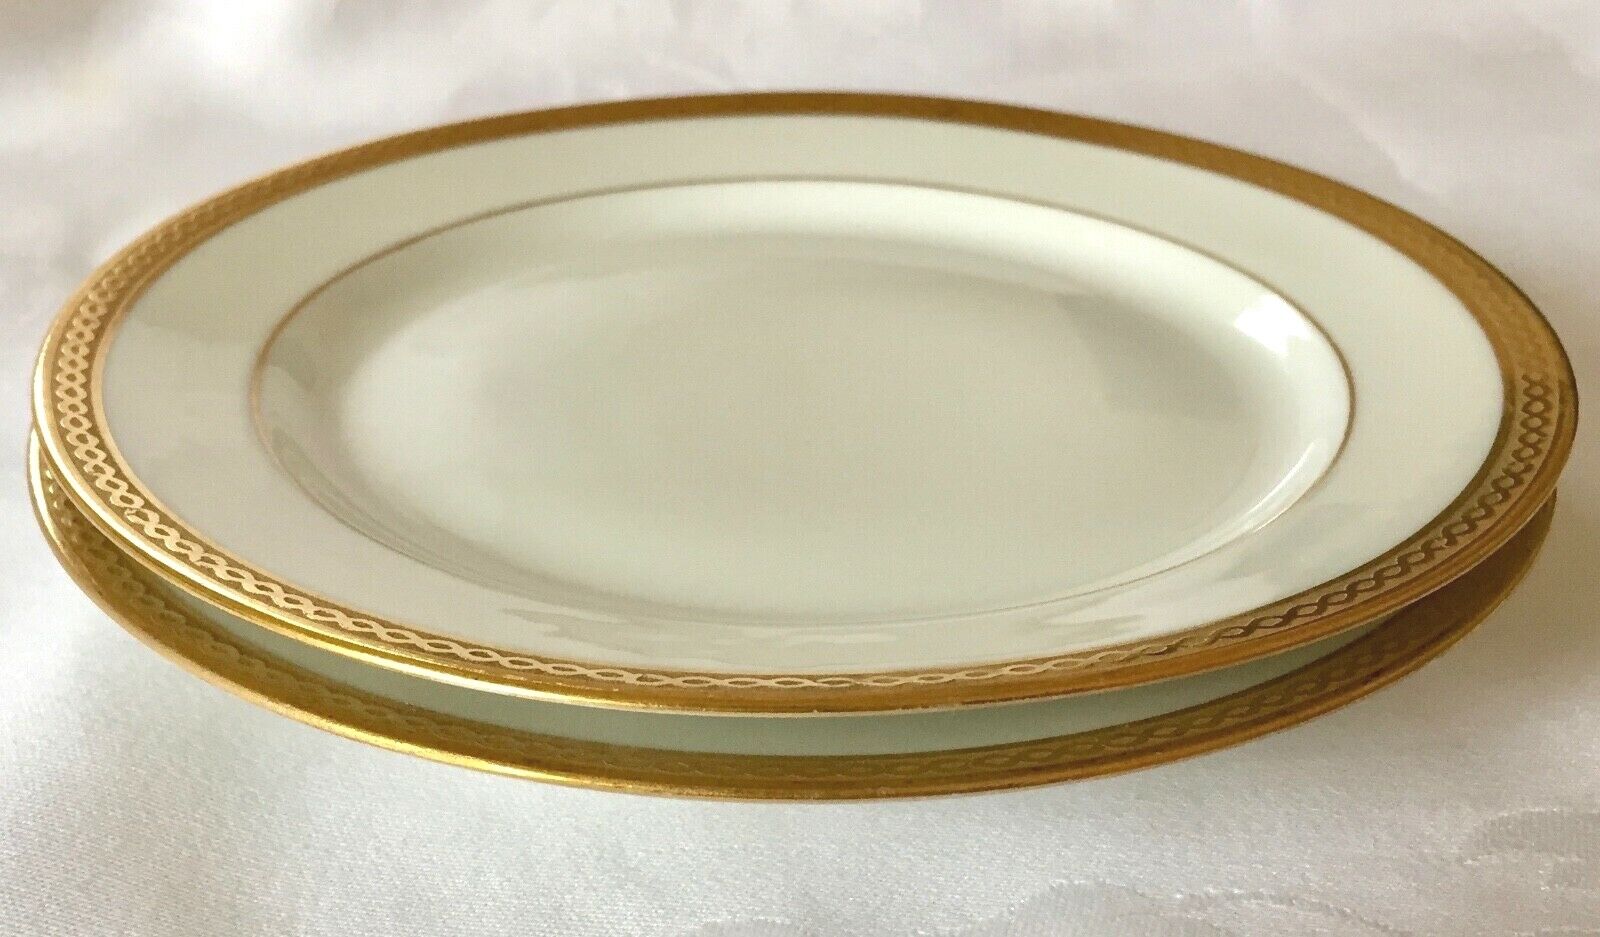 TWO ELEGANT c1905 MARTIAL REDON PL LIMOGES GOLD EDGE BREAD PLATES, EXCLNT COND